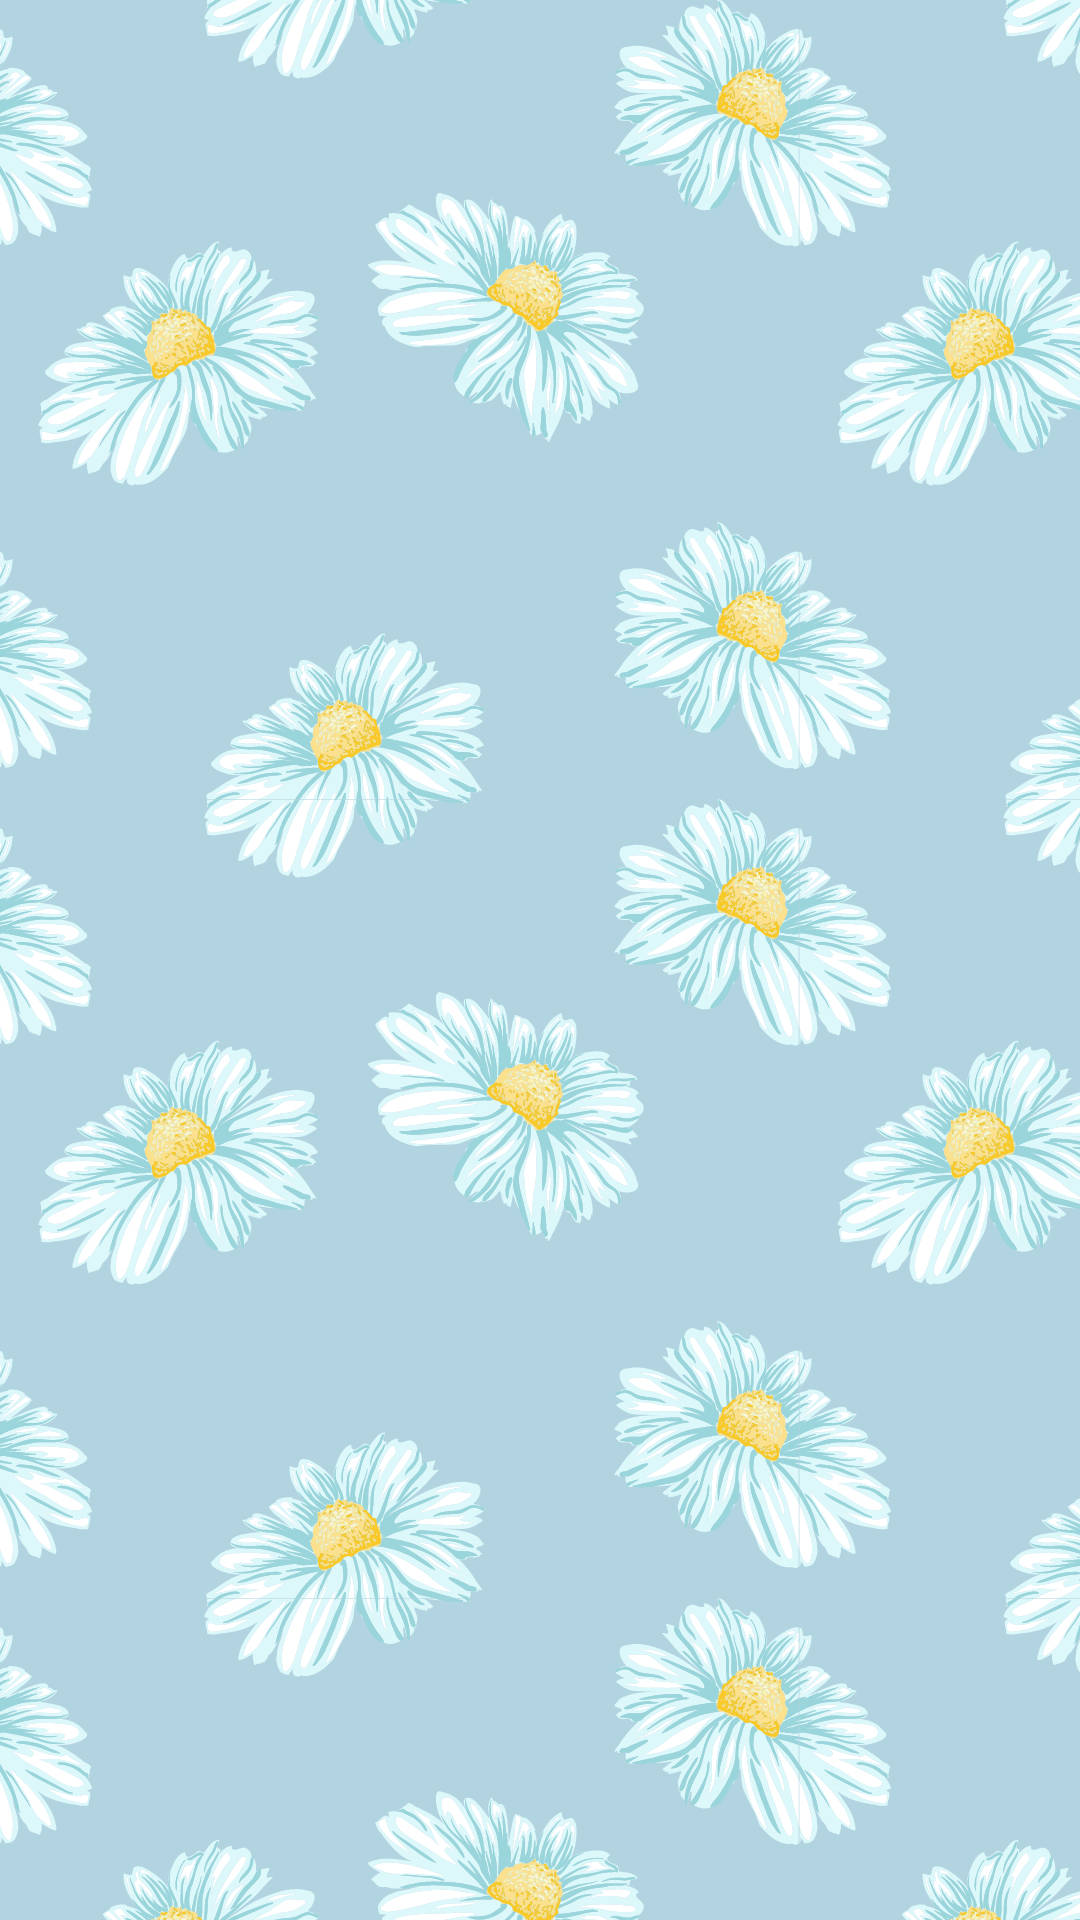 : a blue background with white flowers on it - Daisy